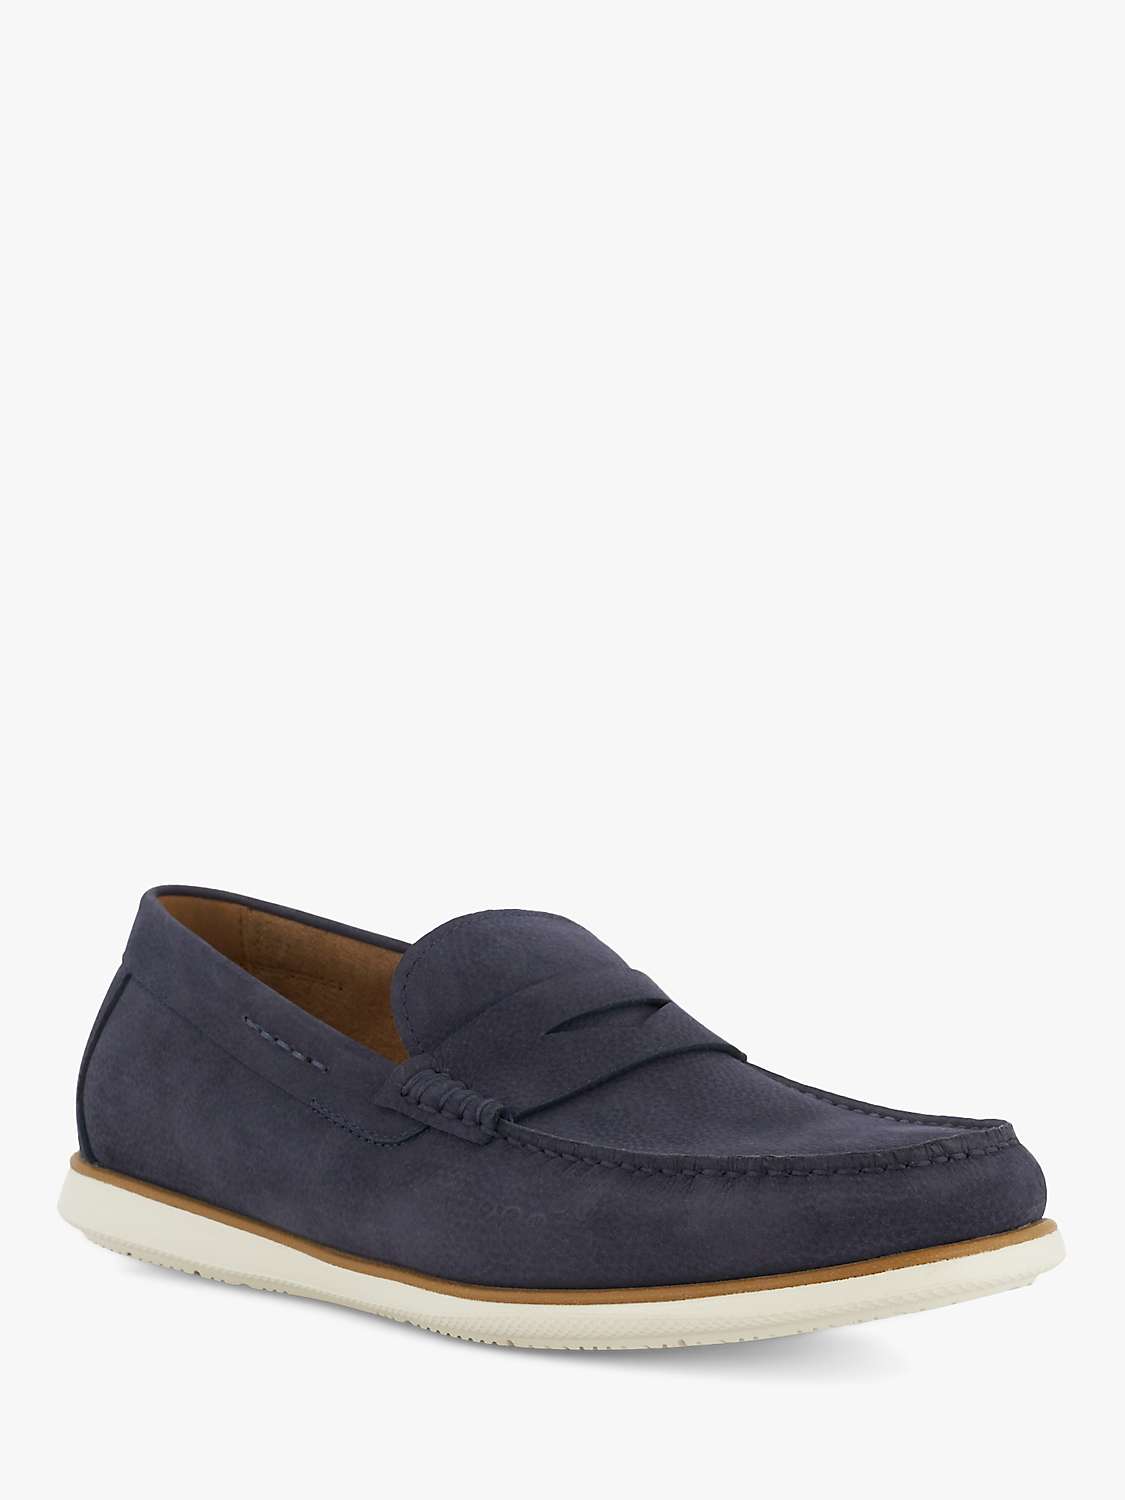 Buy Dune Wide Fit Berkly Nubuck White Sole Loafers, Navy Online at johnlewis.com